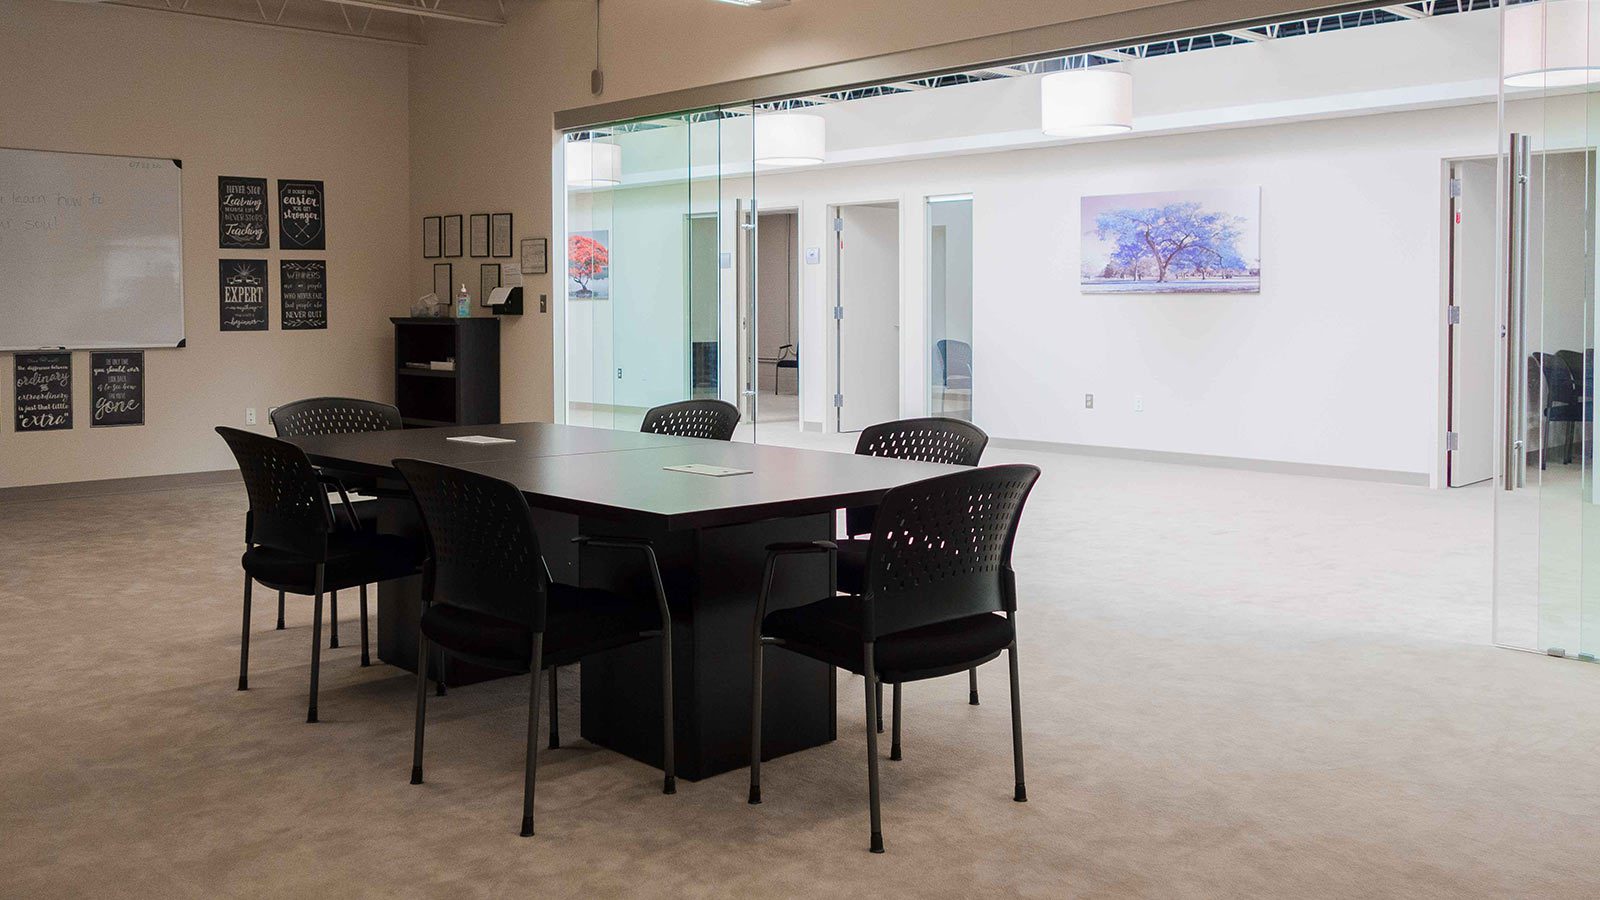 A spacious, modern meeting room with a long table, black chairs, and glass walls.